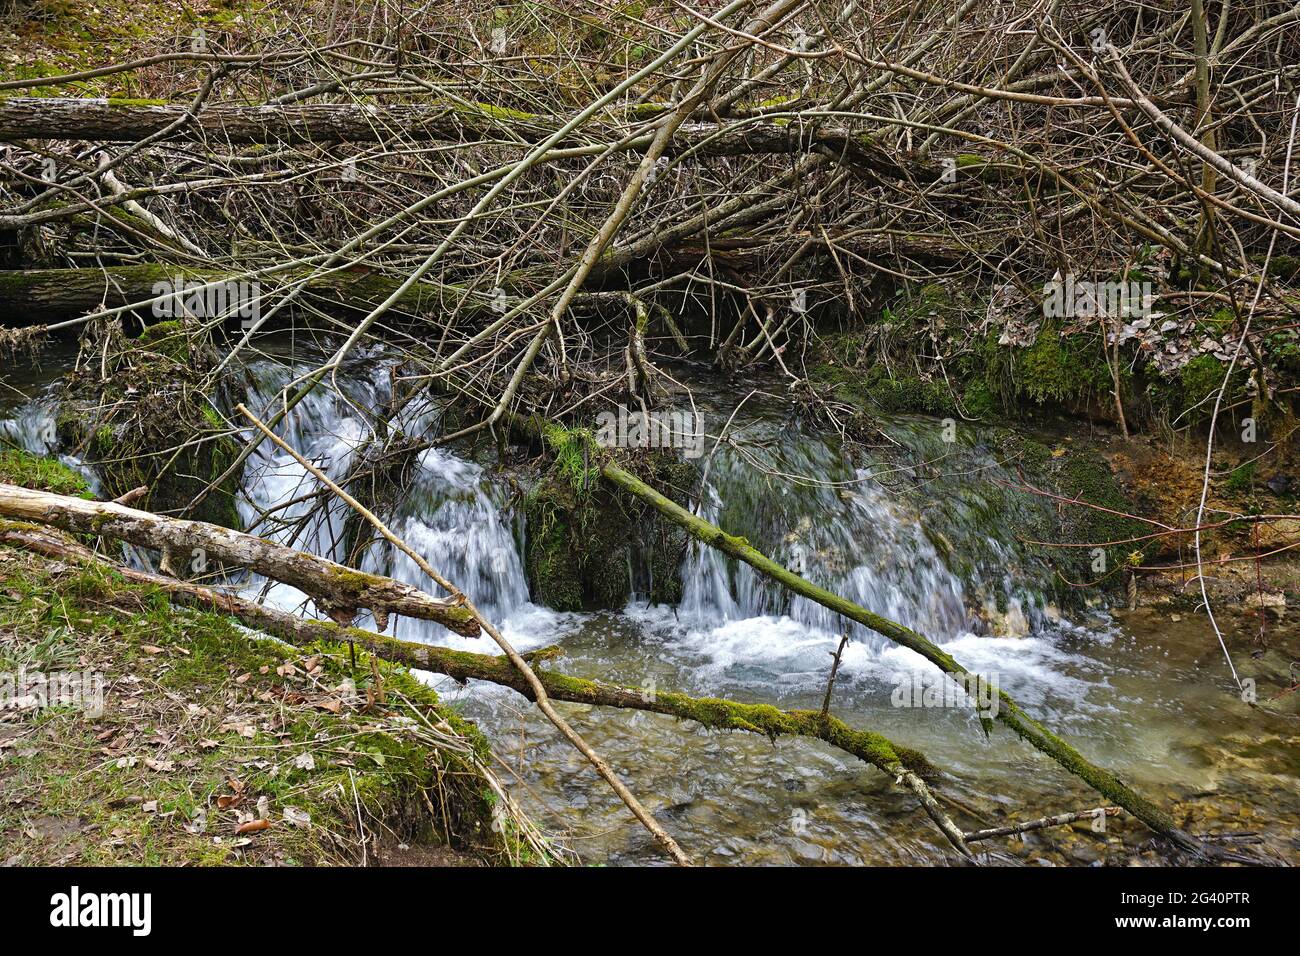 Wiesaz stream blocked with wood clutter Stock Photo